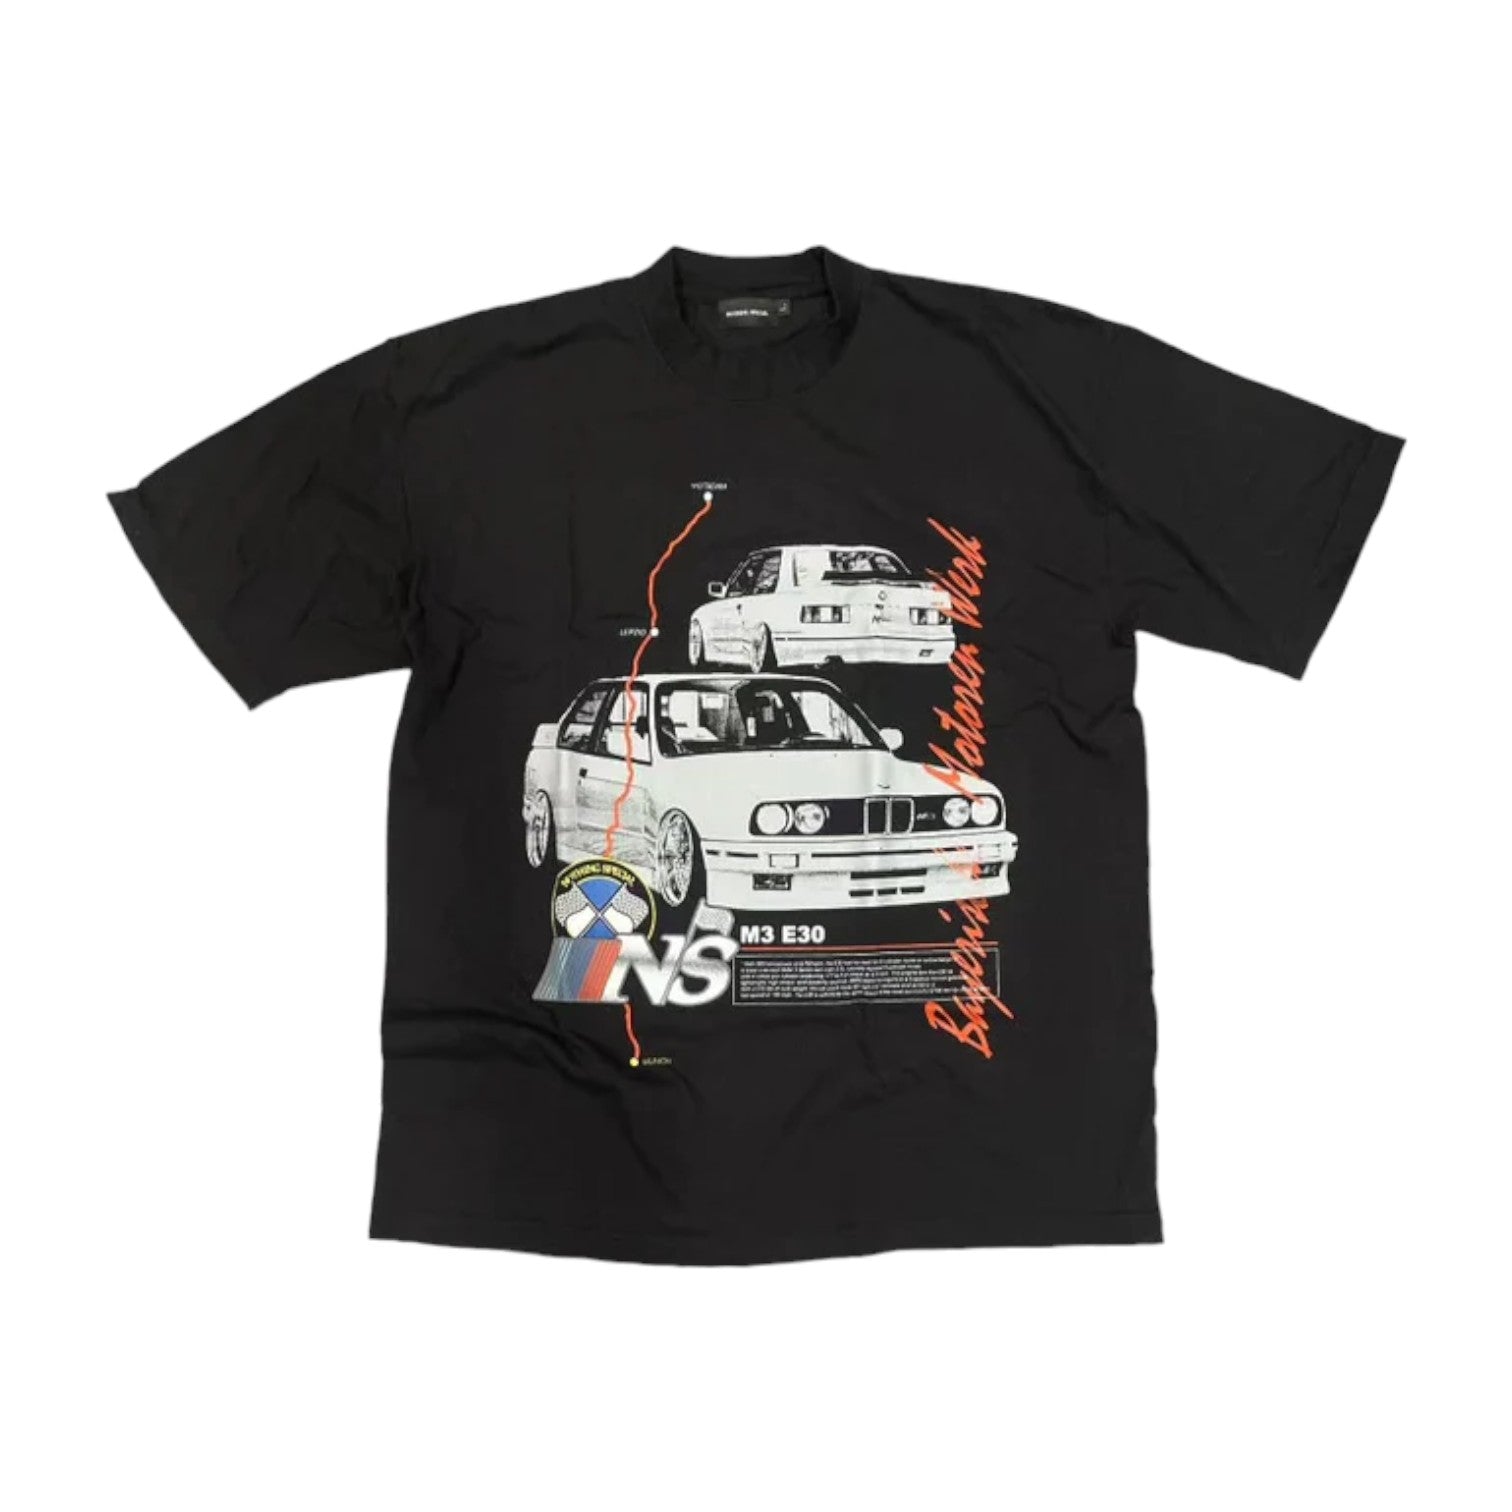 Nothing Special M3 E30 S/S Tee